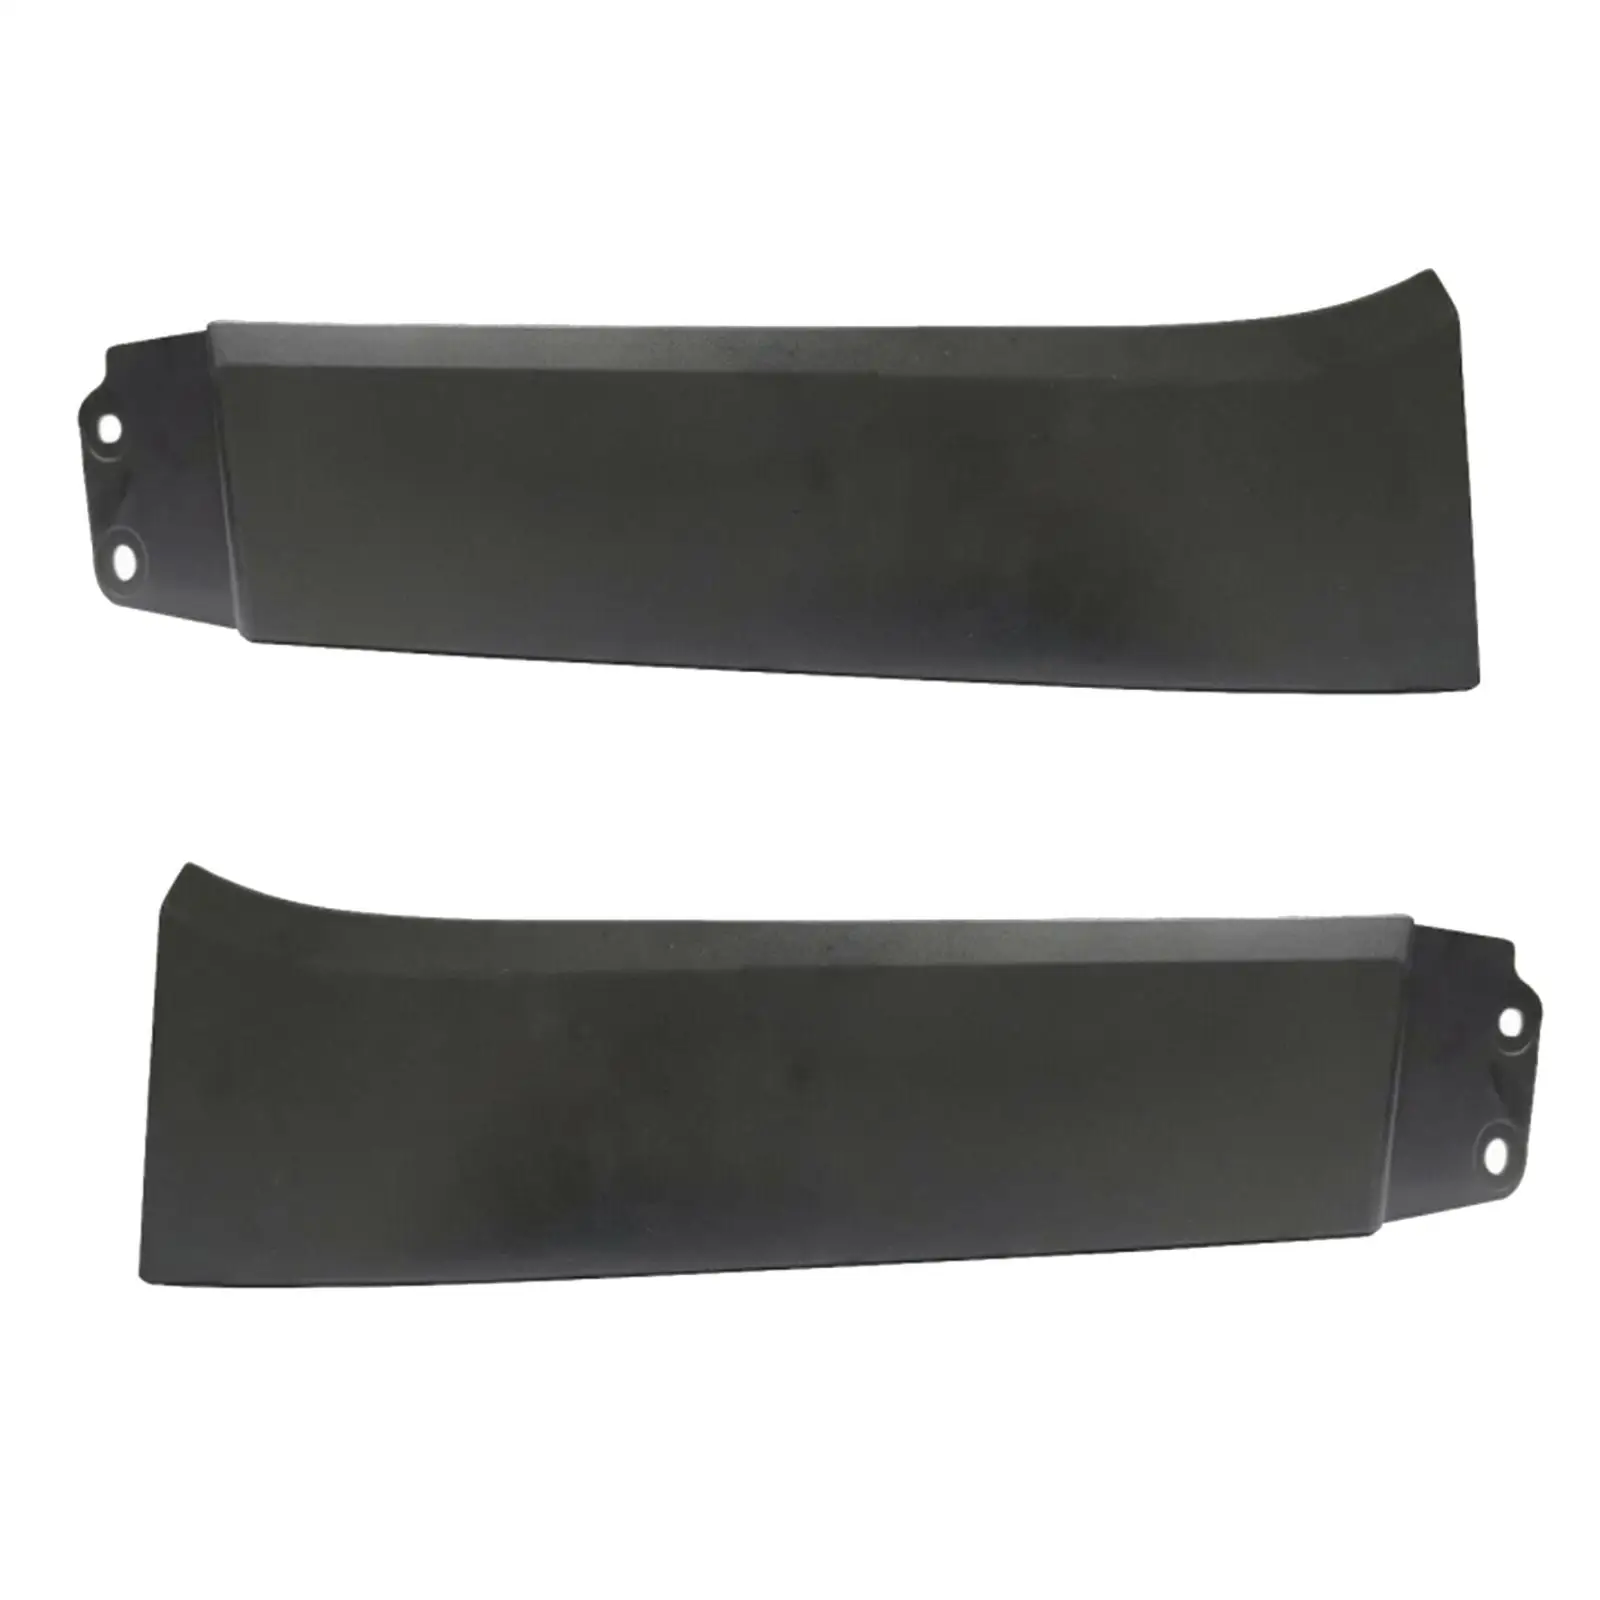 53932-0C904 Replaces Front below Headlight Extension Panels Headlight Molding Lower Filler Set for 2007-2013